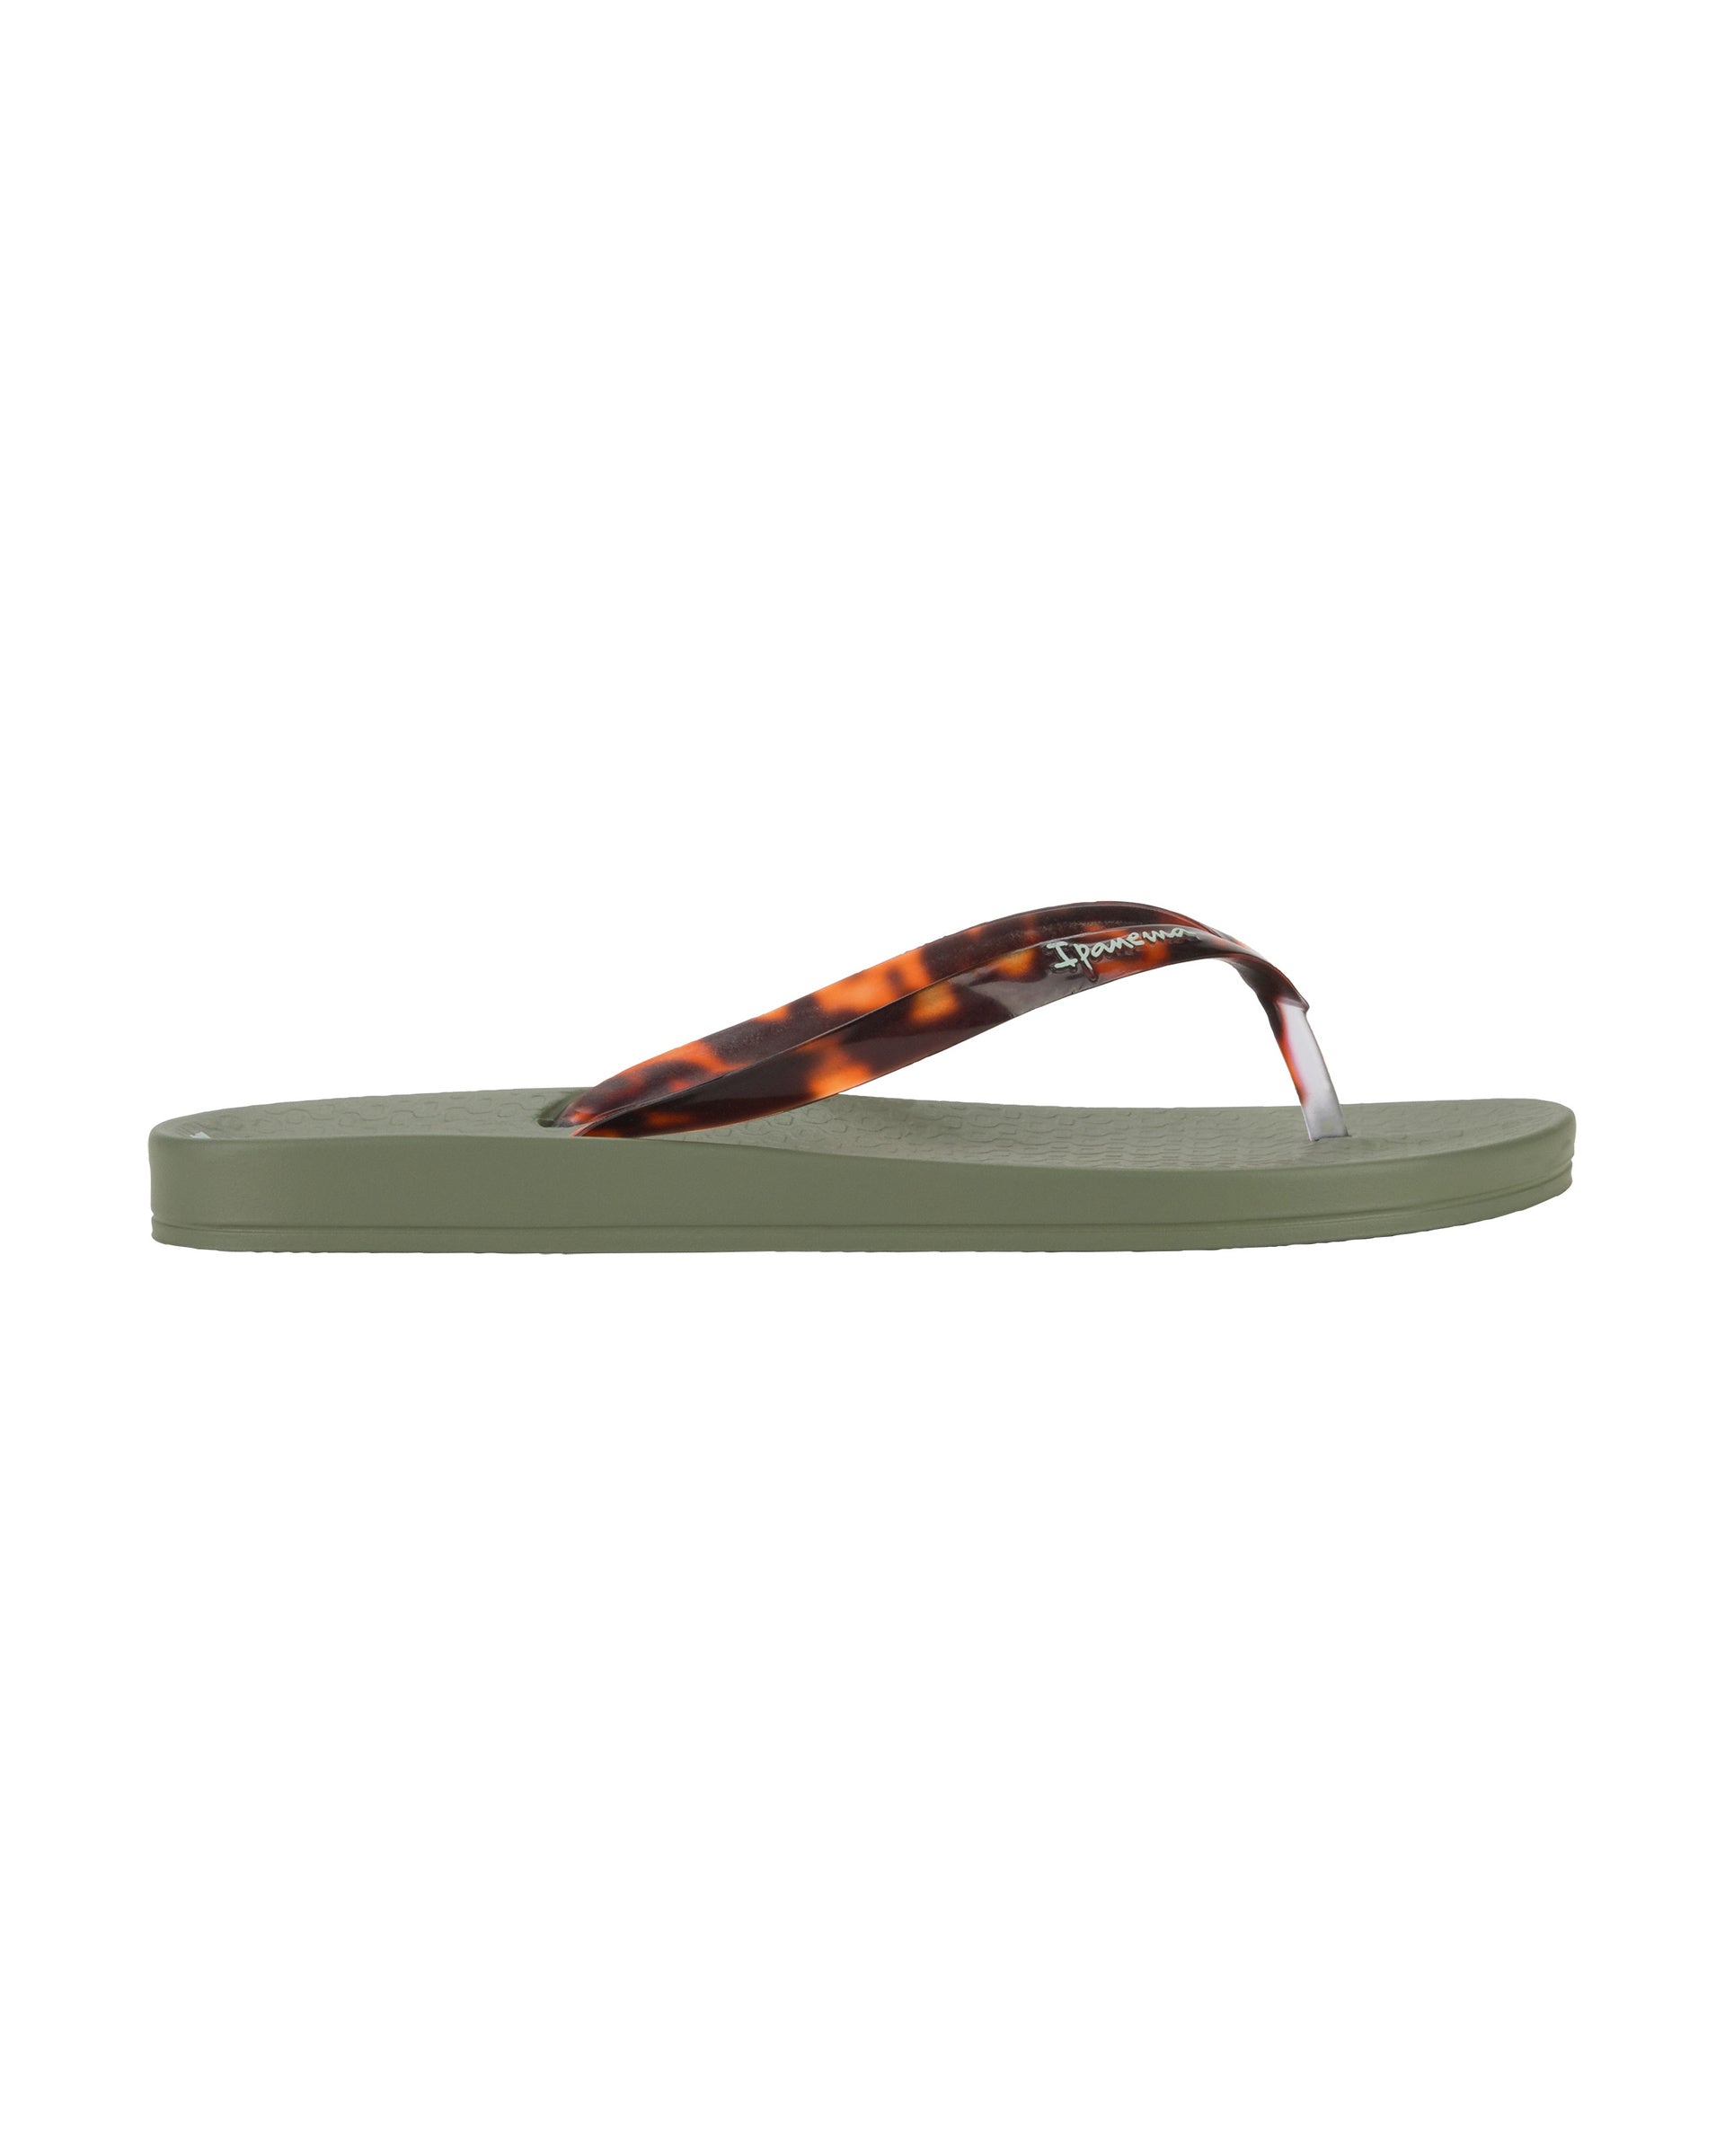 Outer side view of a green Ipanema Ana Connect women's flip flop with brown tortoiseshell  color strap.